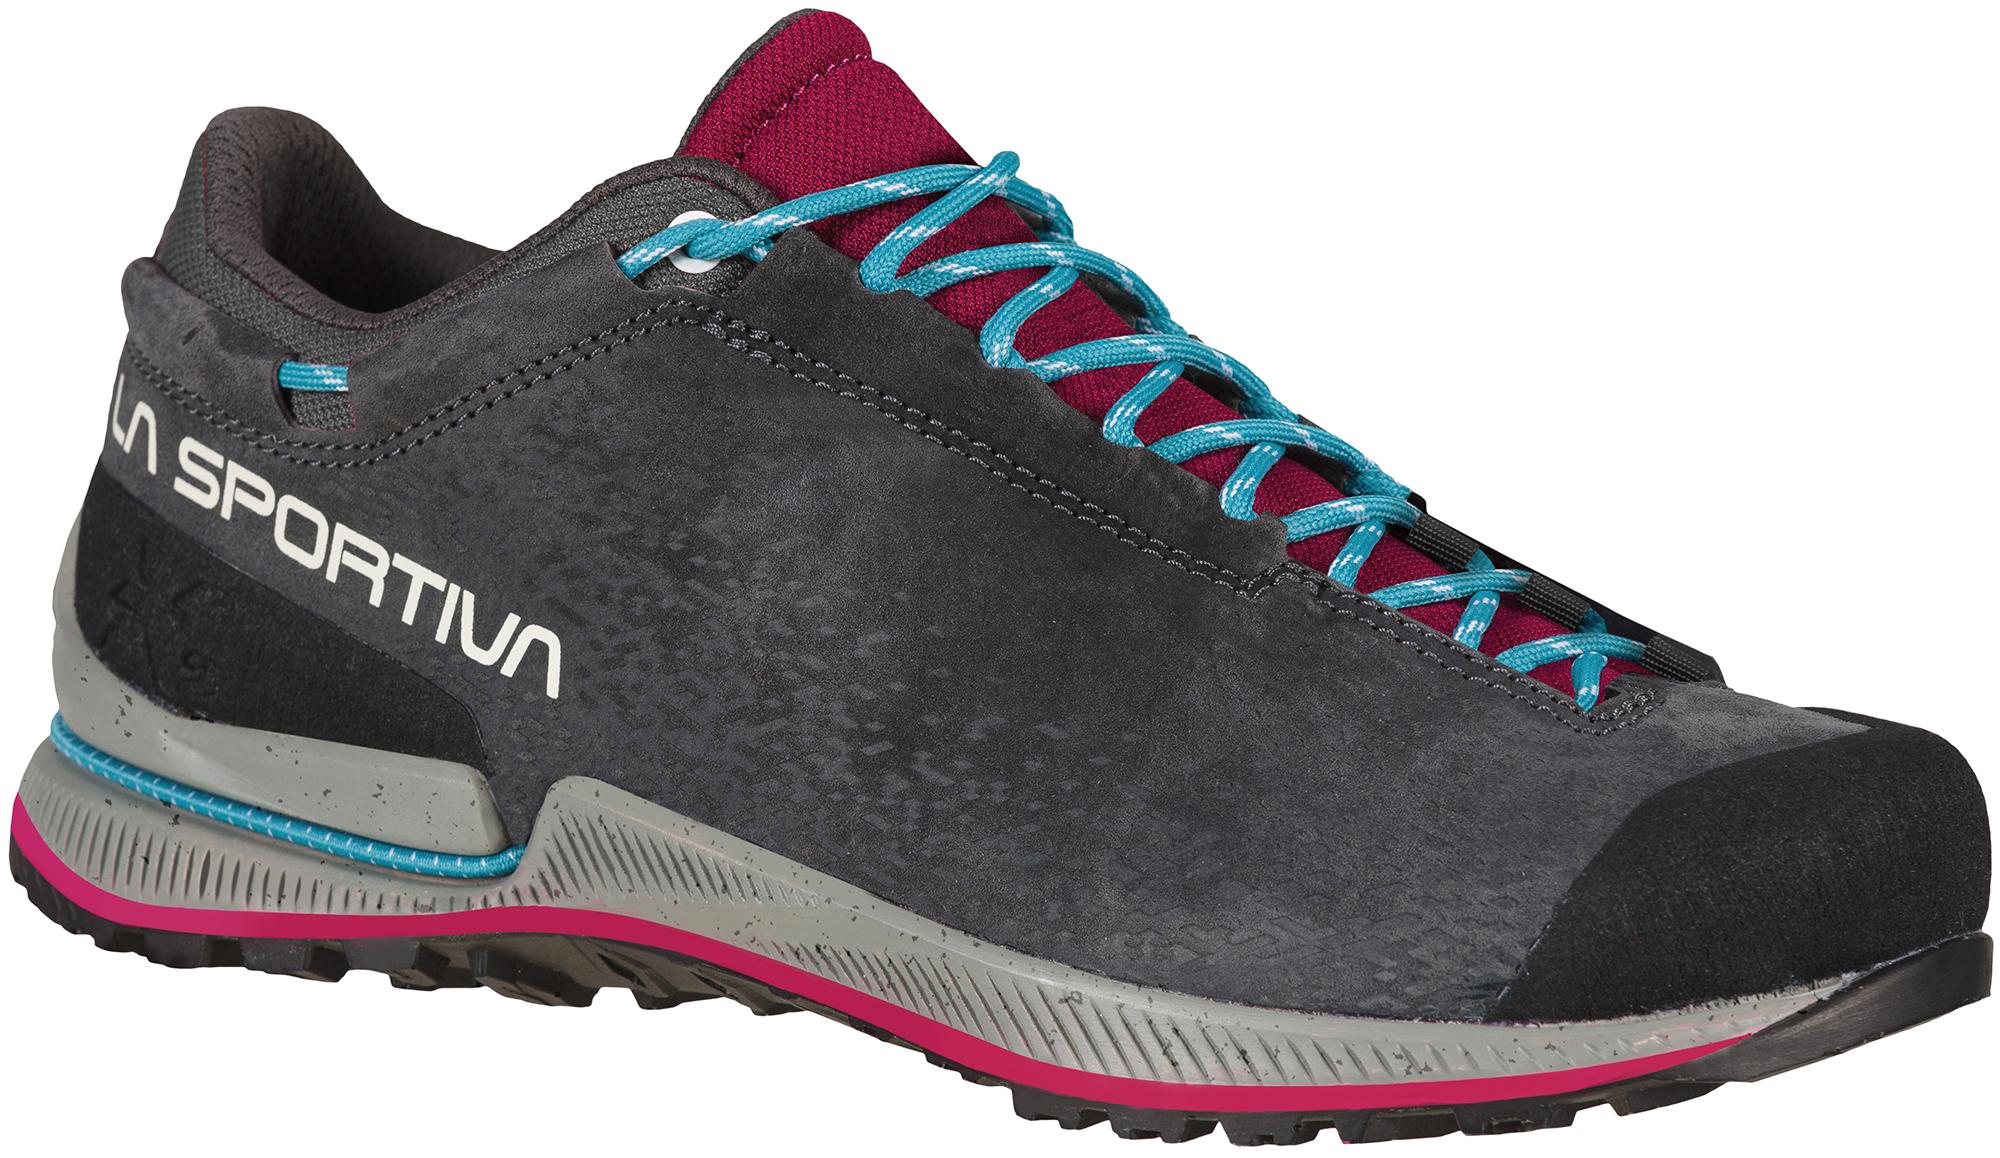 La Sportiva Womens Tx2 Evo Leather Approach Shoes - Carbon/red Plum